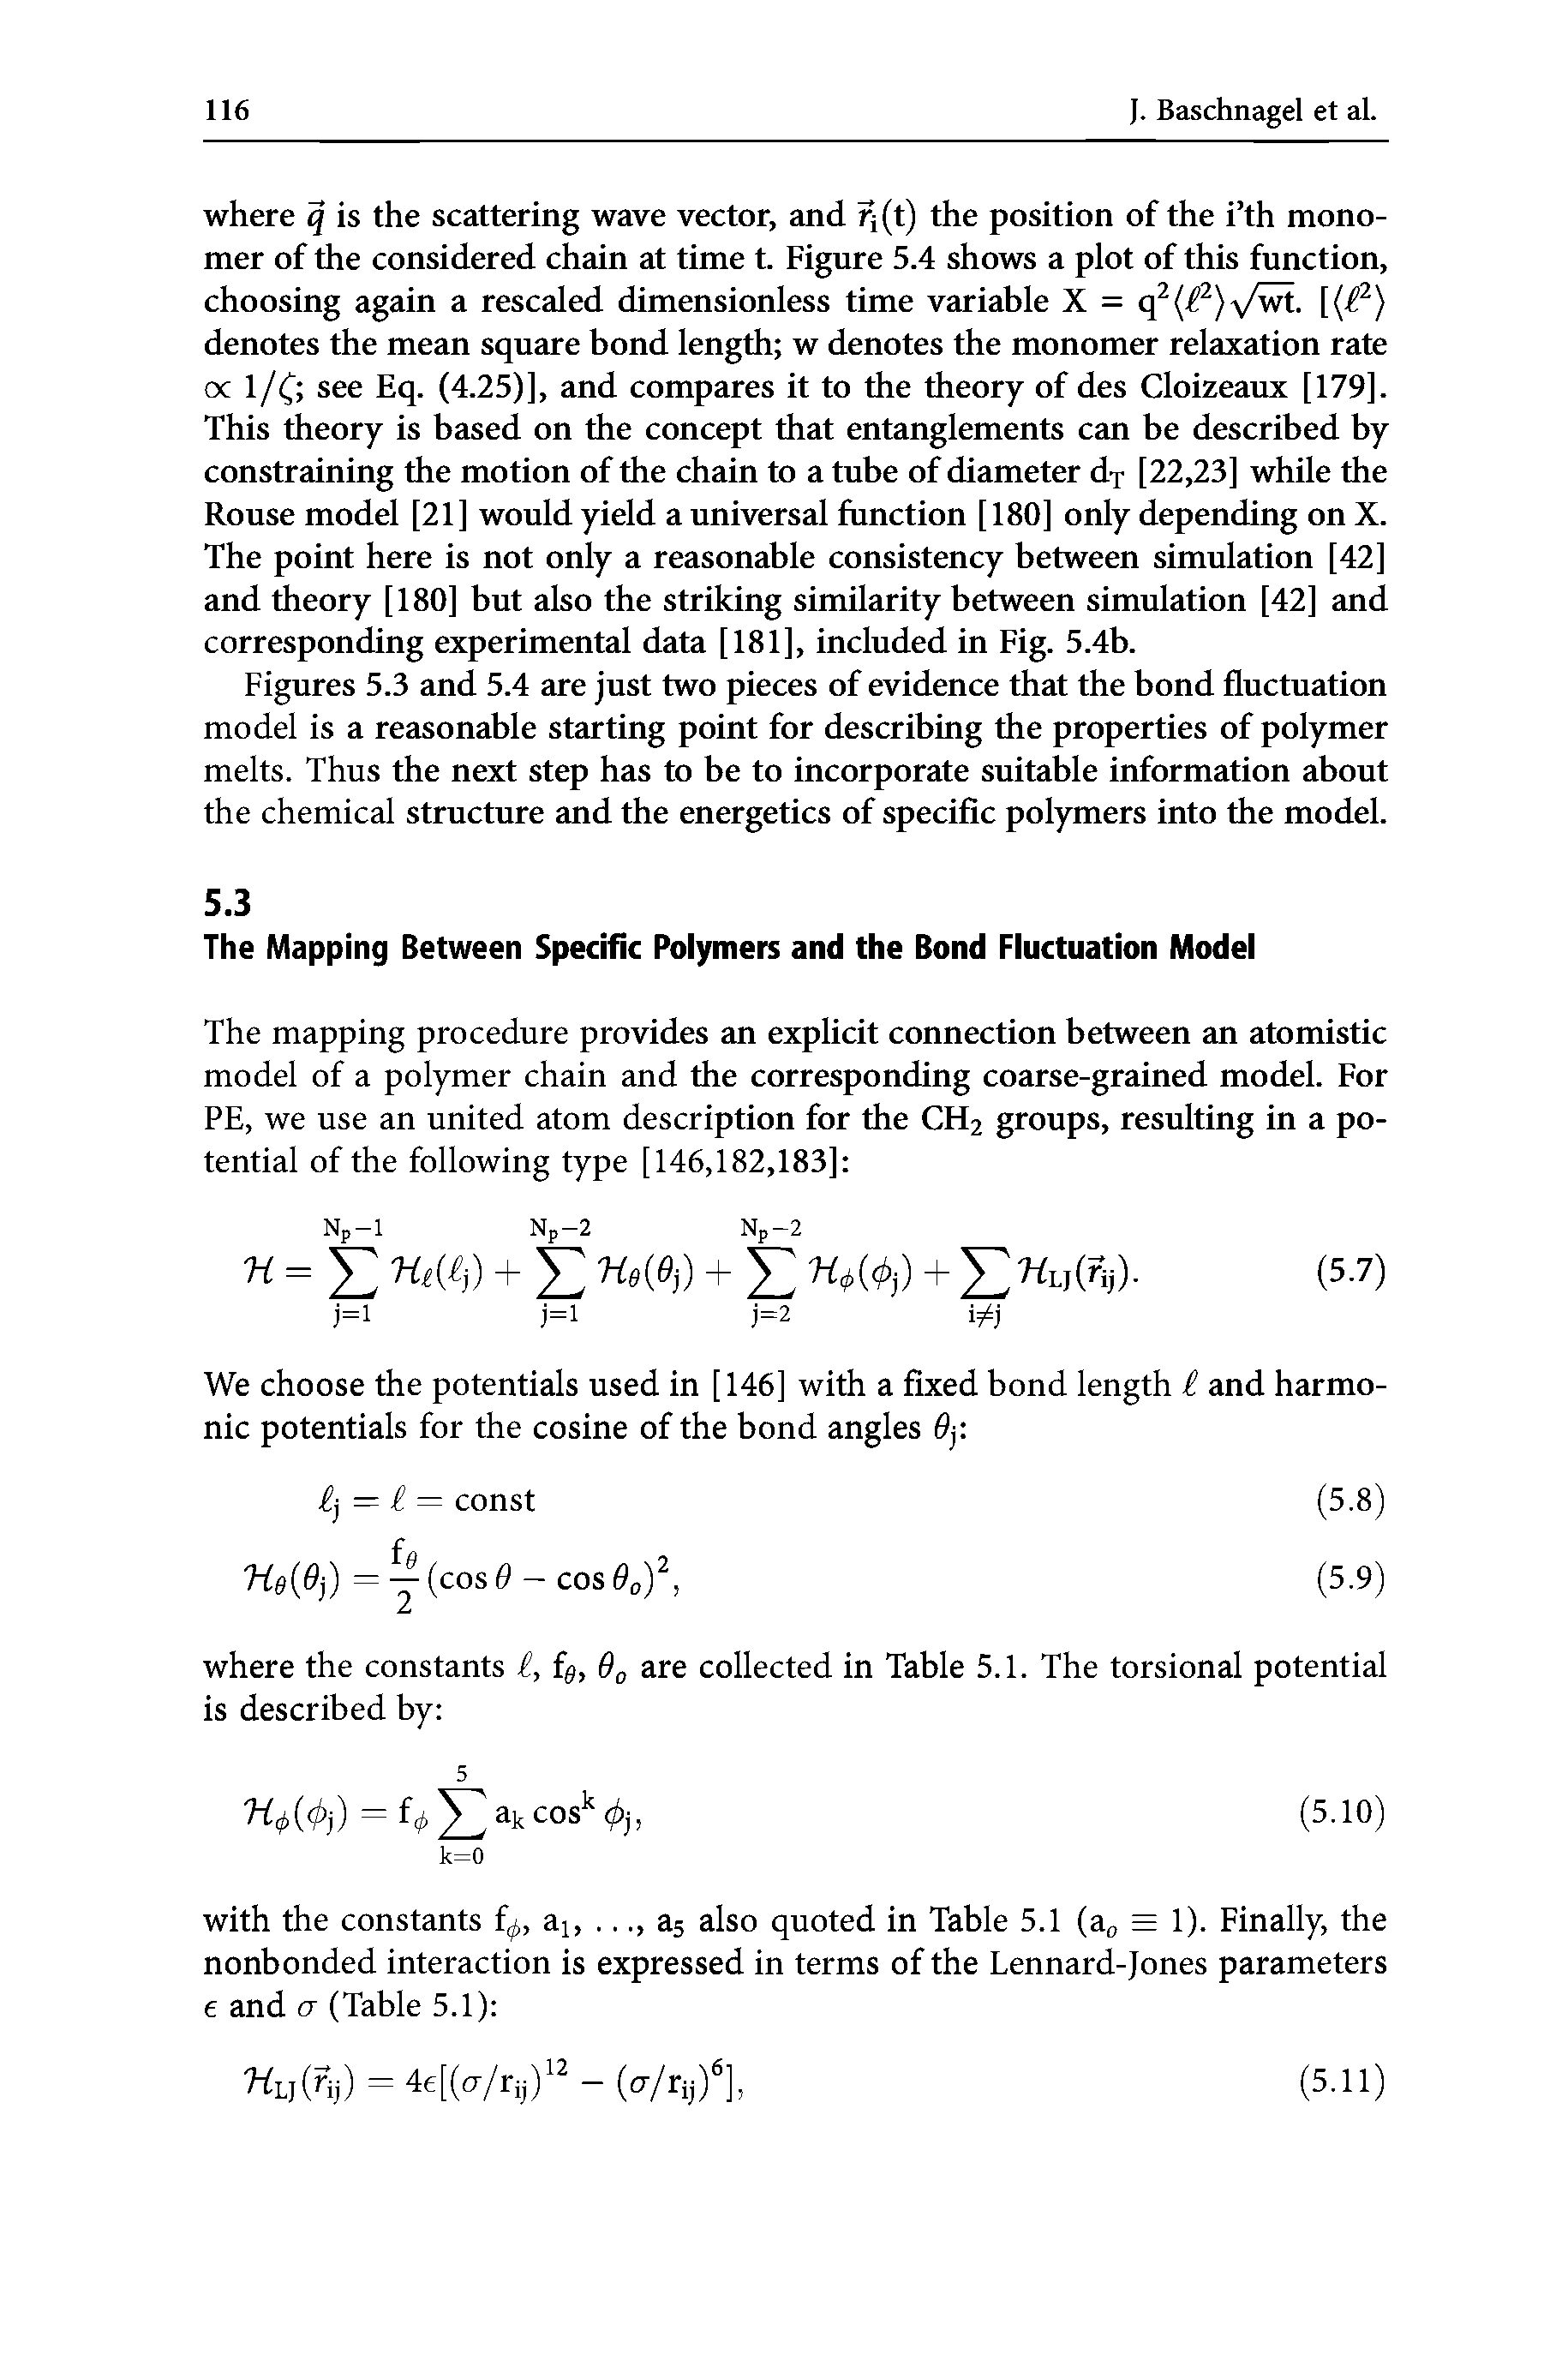 Figures 5.3 and 5.4 are just two pieces of evidence that the bond fluctuation model is a reasonable starting point for describing the properties of polymer melts. Thus the next step has to be to incorporate suitable information about the chemical structure and the energetics of specific polymers into the model.